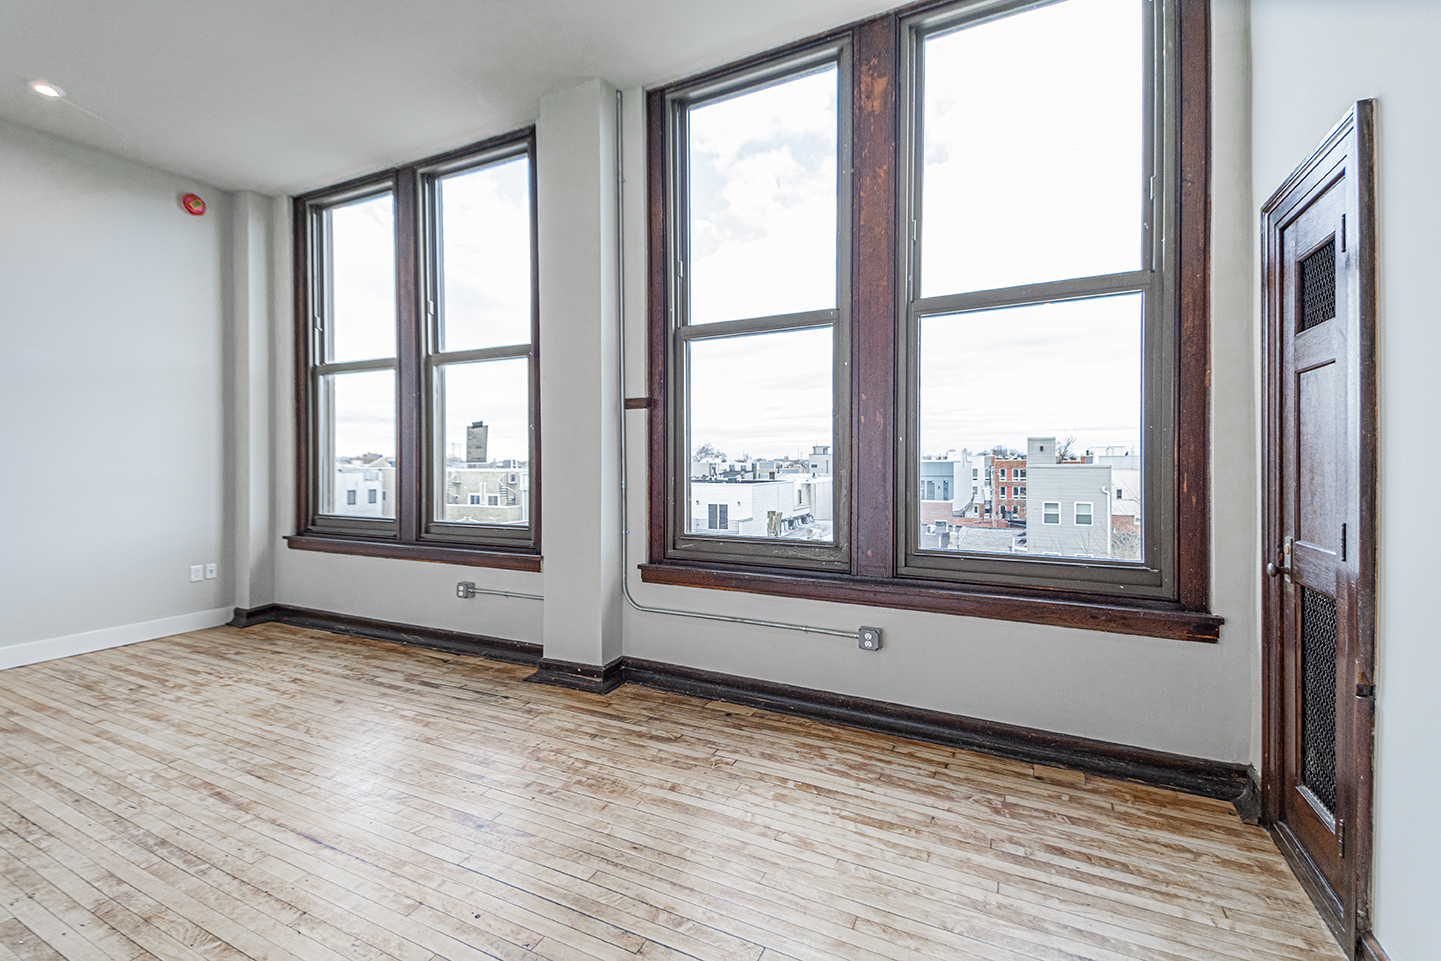 Property Photo For 1300 S. 19th St, Unit 300